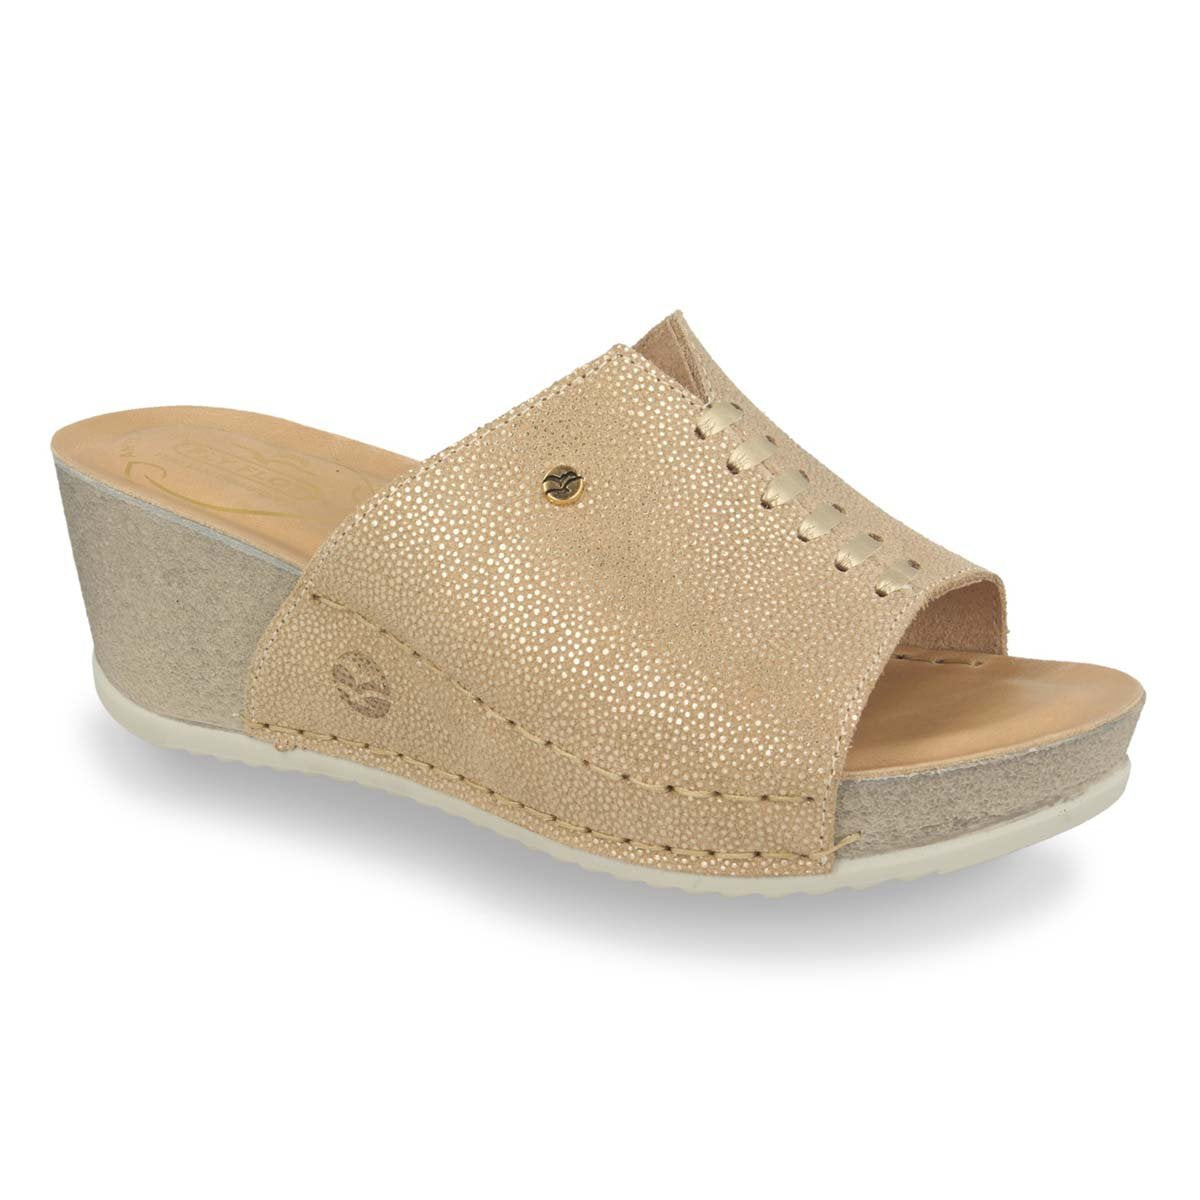 See the Leather Wedge With Anti-Shock Cushioned Leather Insole in the colour BEIGE, available in various sizes